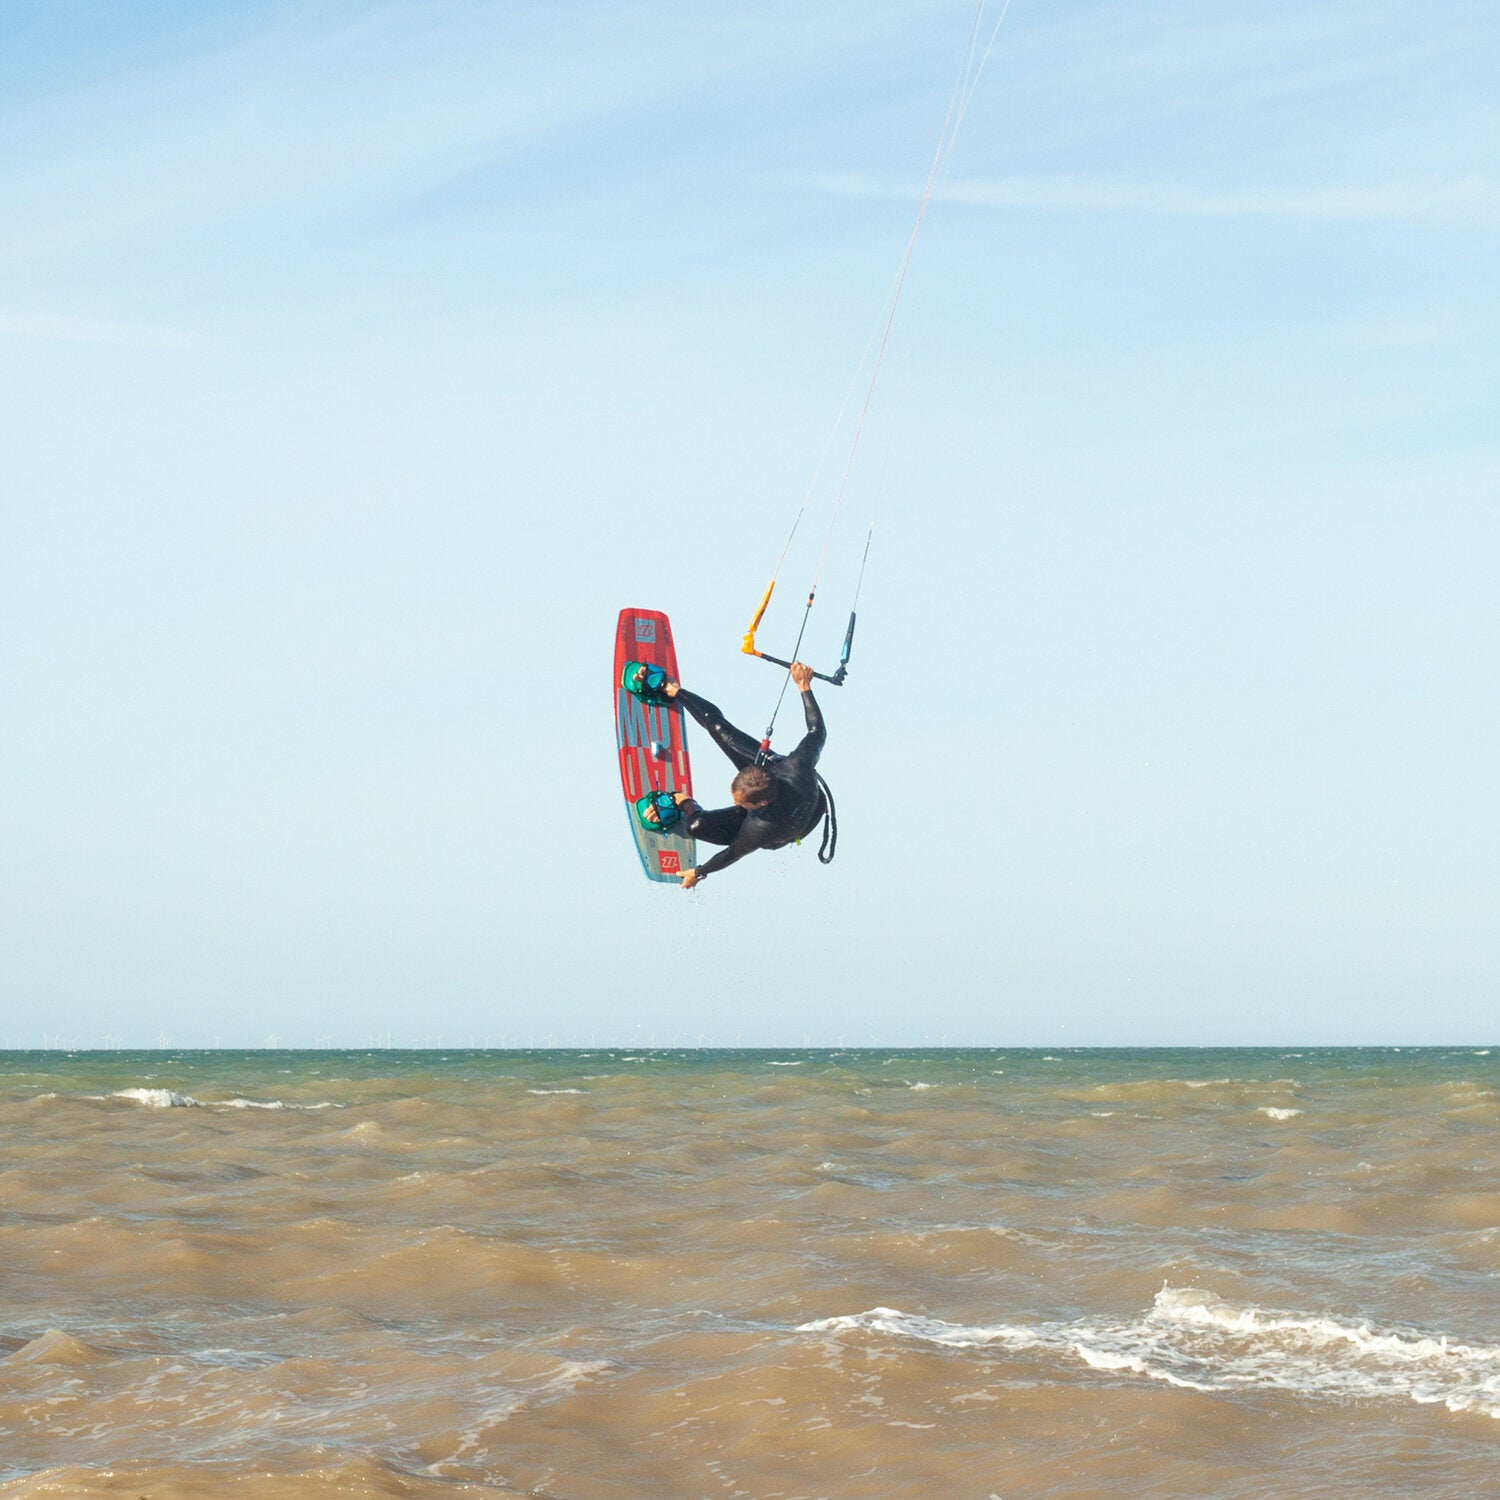 A kitesurfer having a private kitesurfing lesson on how to jump and perform tricks and rotations whilst in the air.